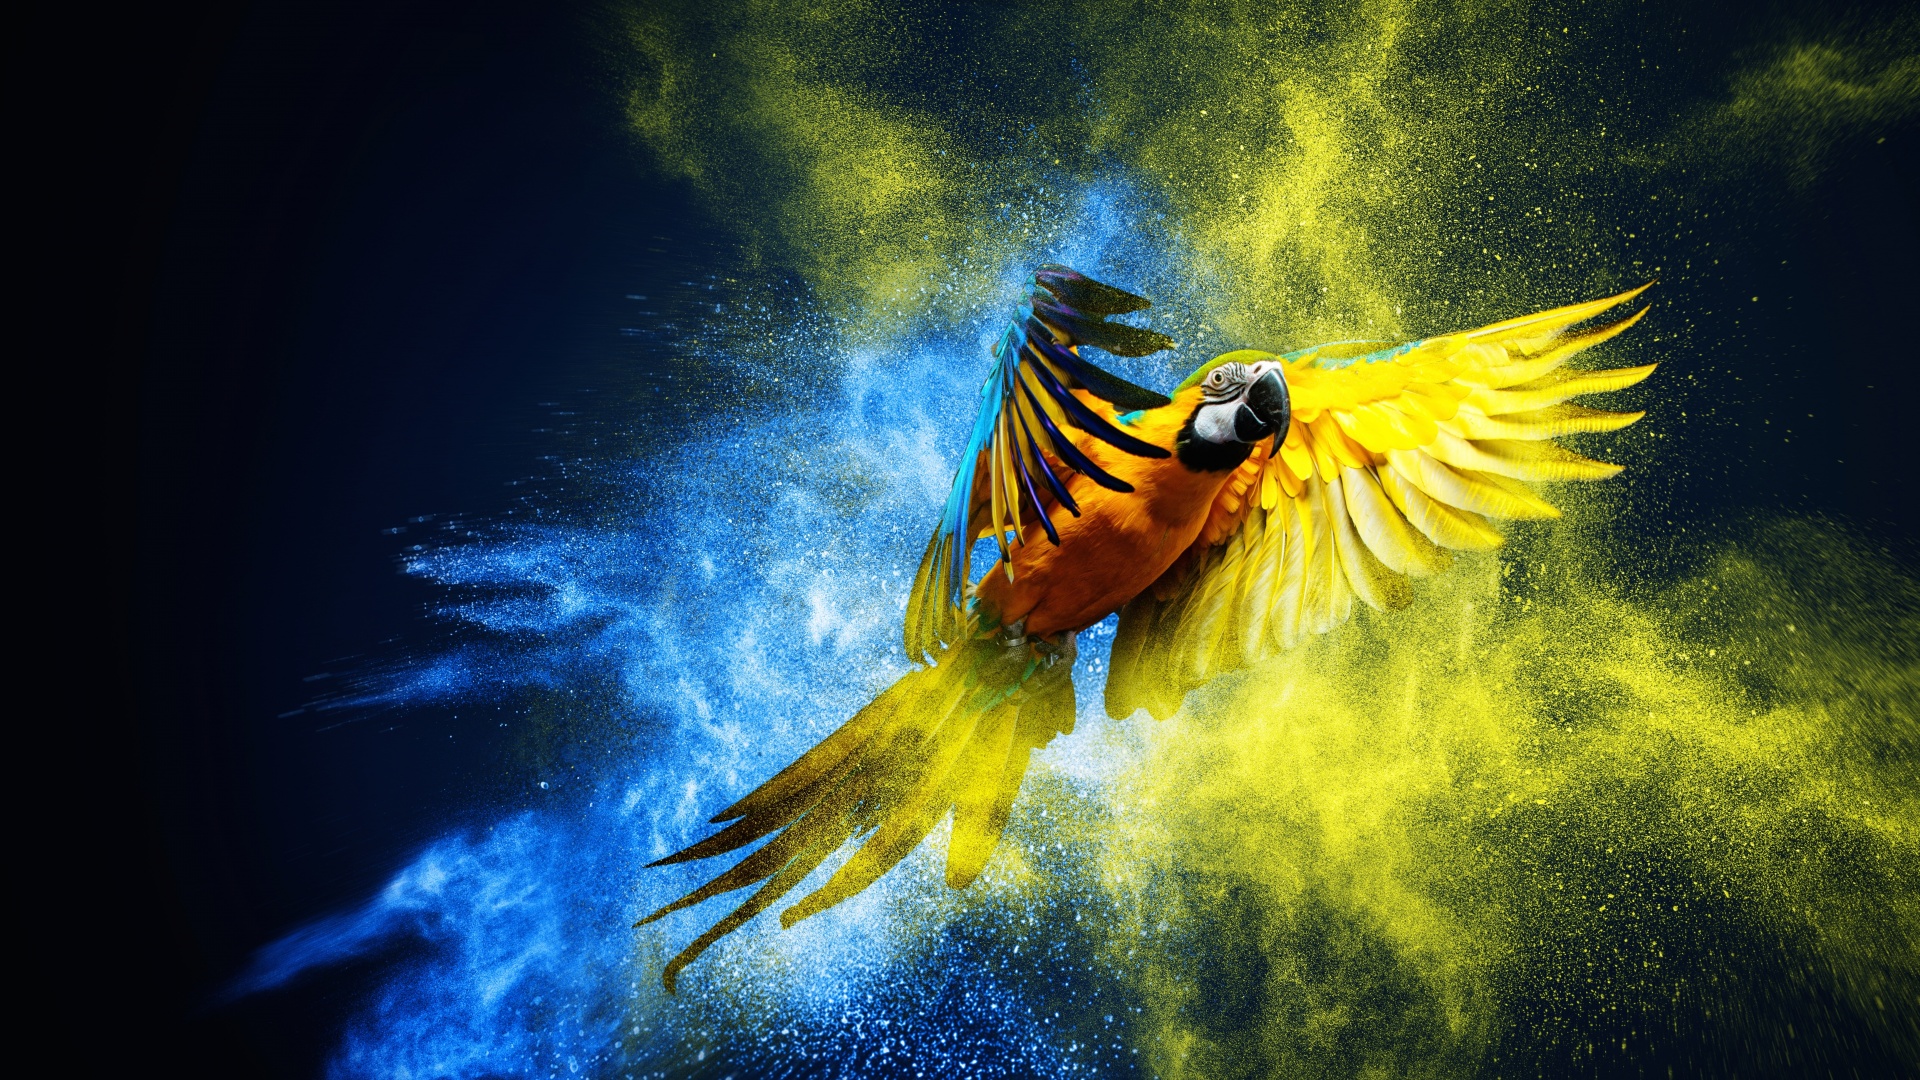 Blue-and-yellow macaw Wallpaper 4K, Macaw, Animals, #7438